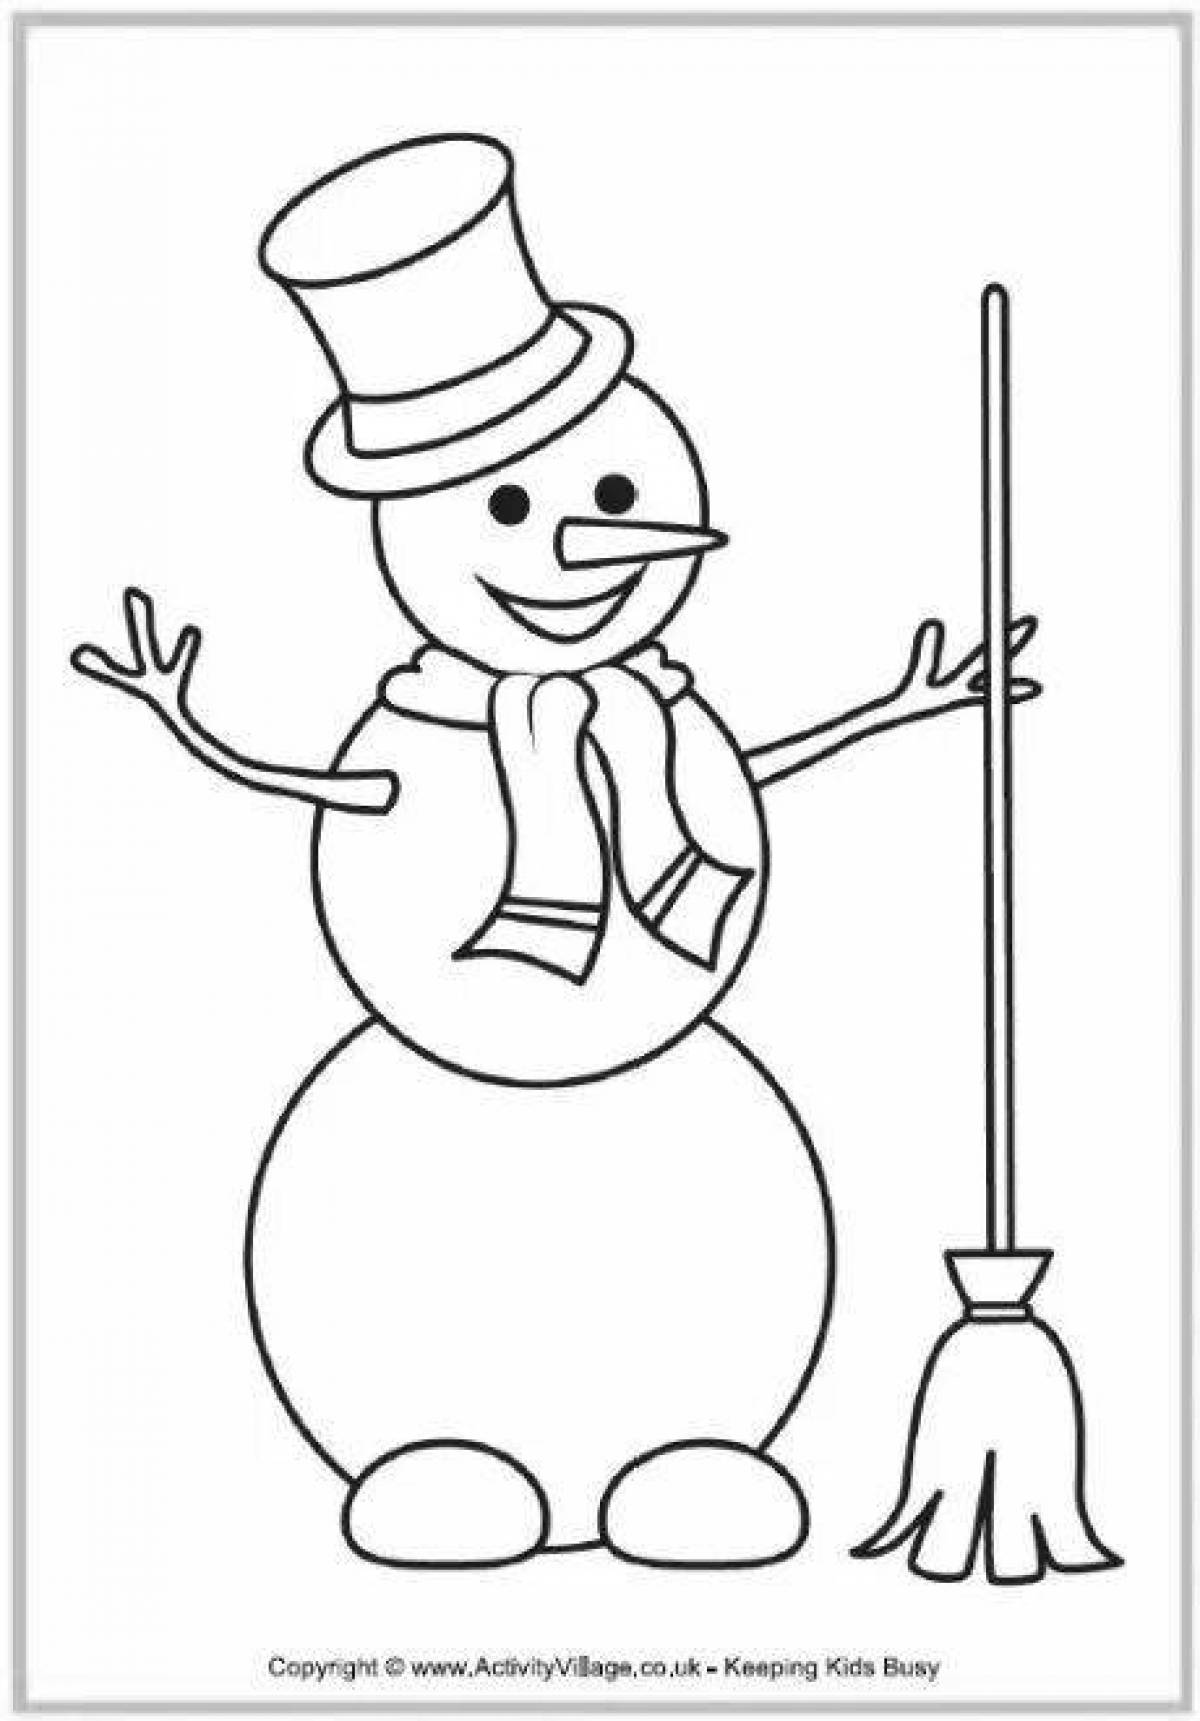 Bright coloring snowman for children 2-3 years old